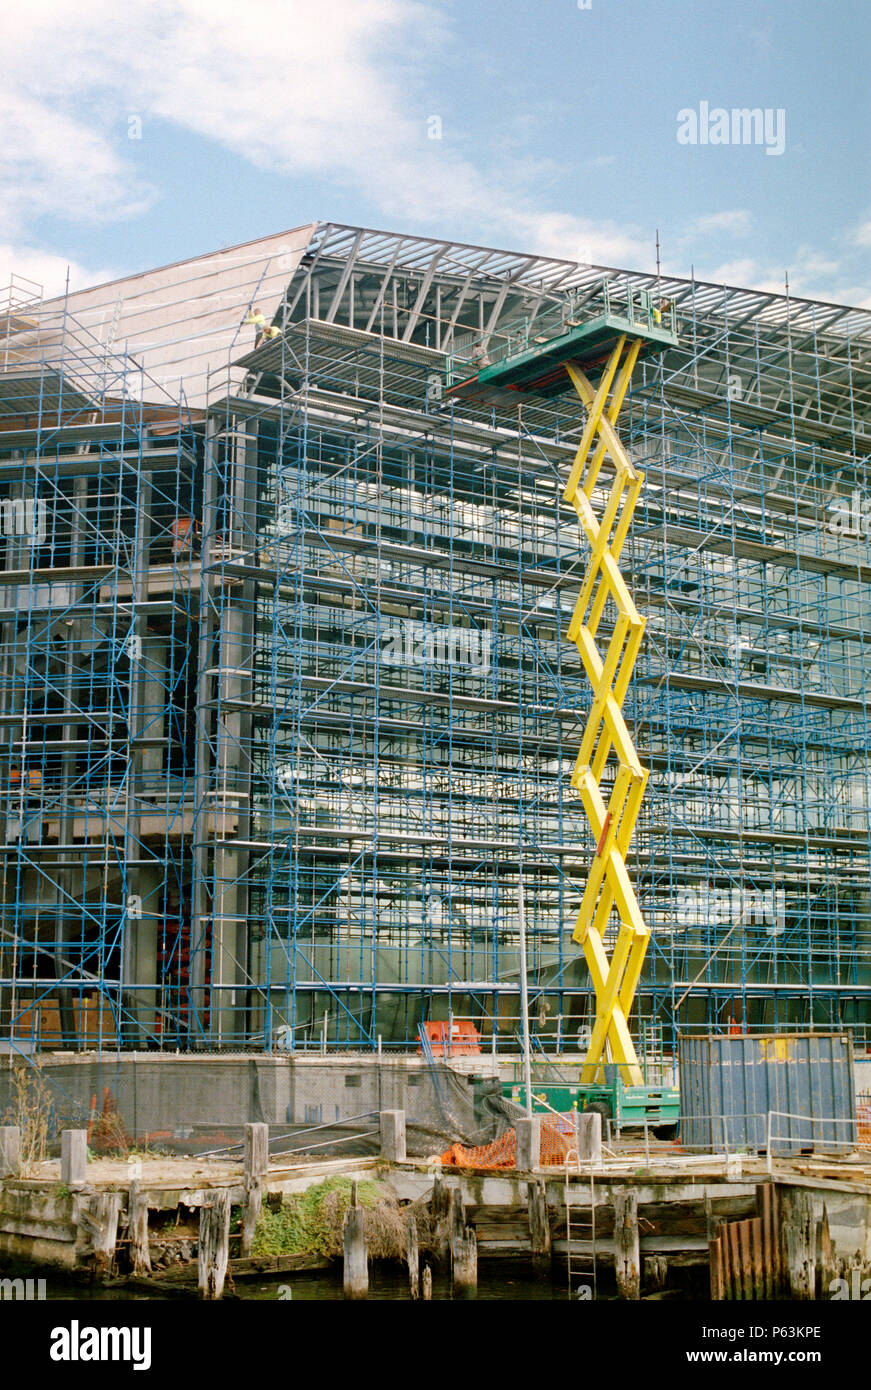 Large size scissor lift used for access on the new convention centre building under construction in Melbourne, Australia Stock Photo